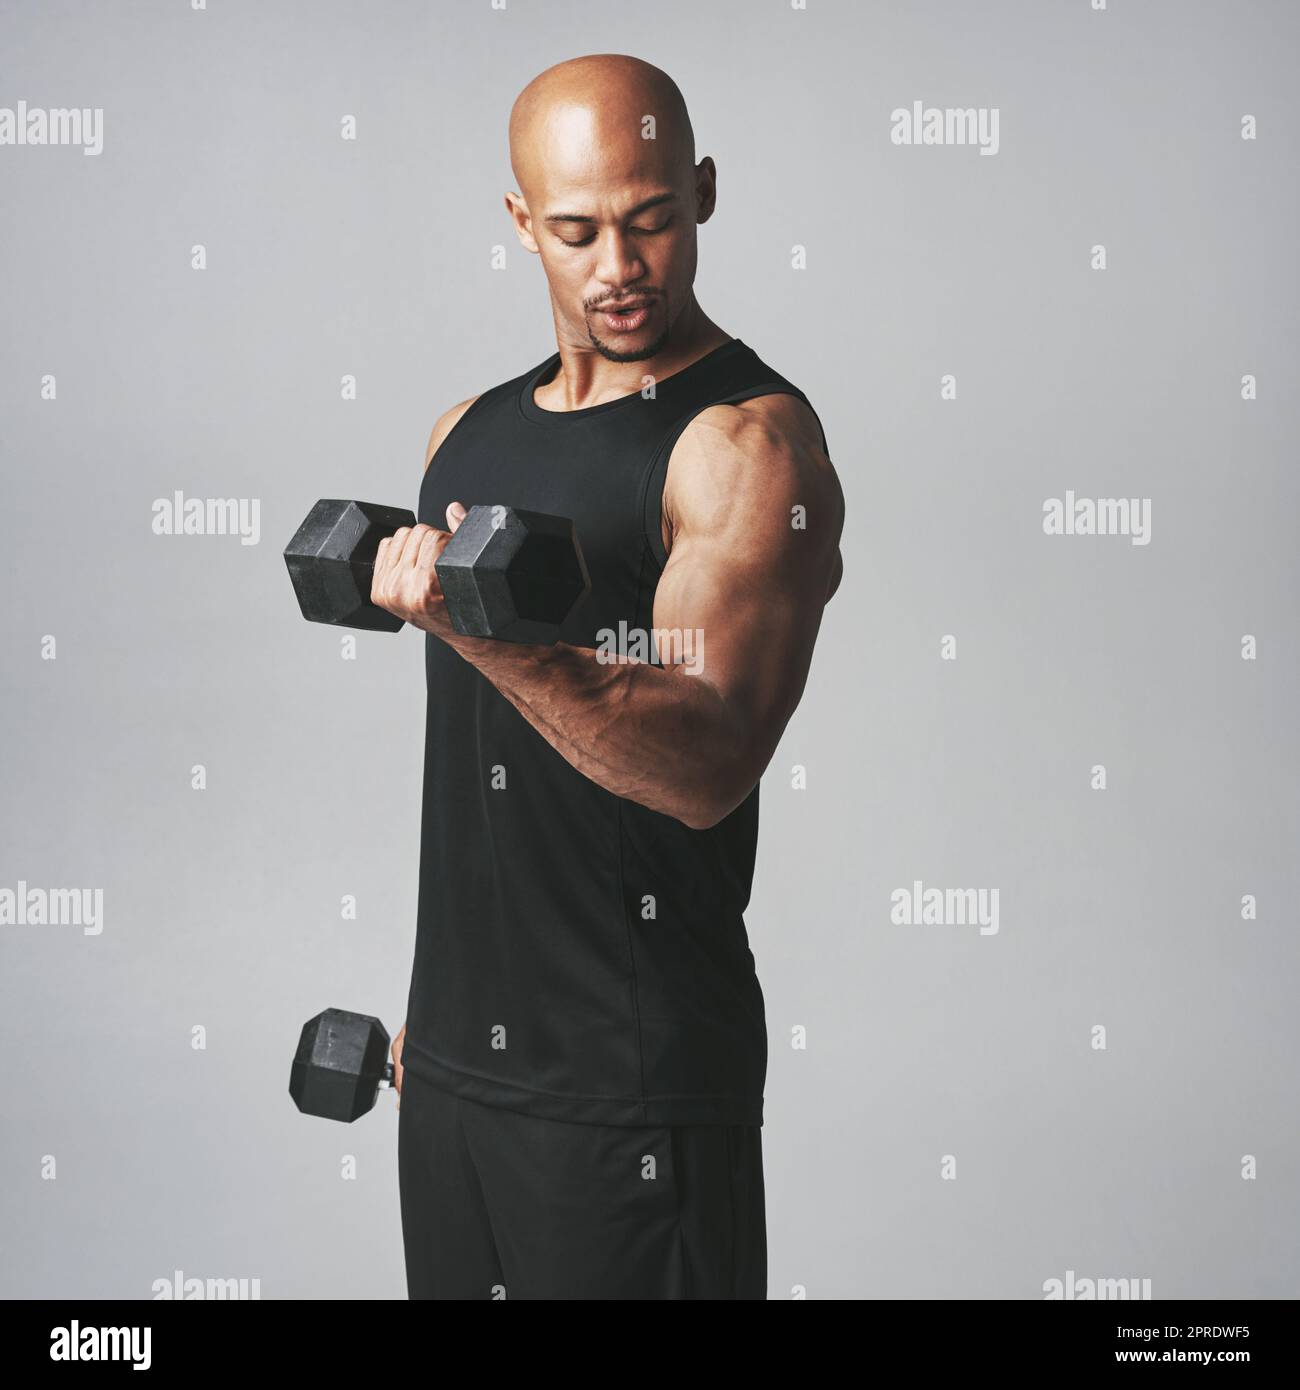 Building his biceps. Studio shot of an athletic young man working out with dumbbells against a grey background. Stock Photo